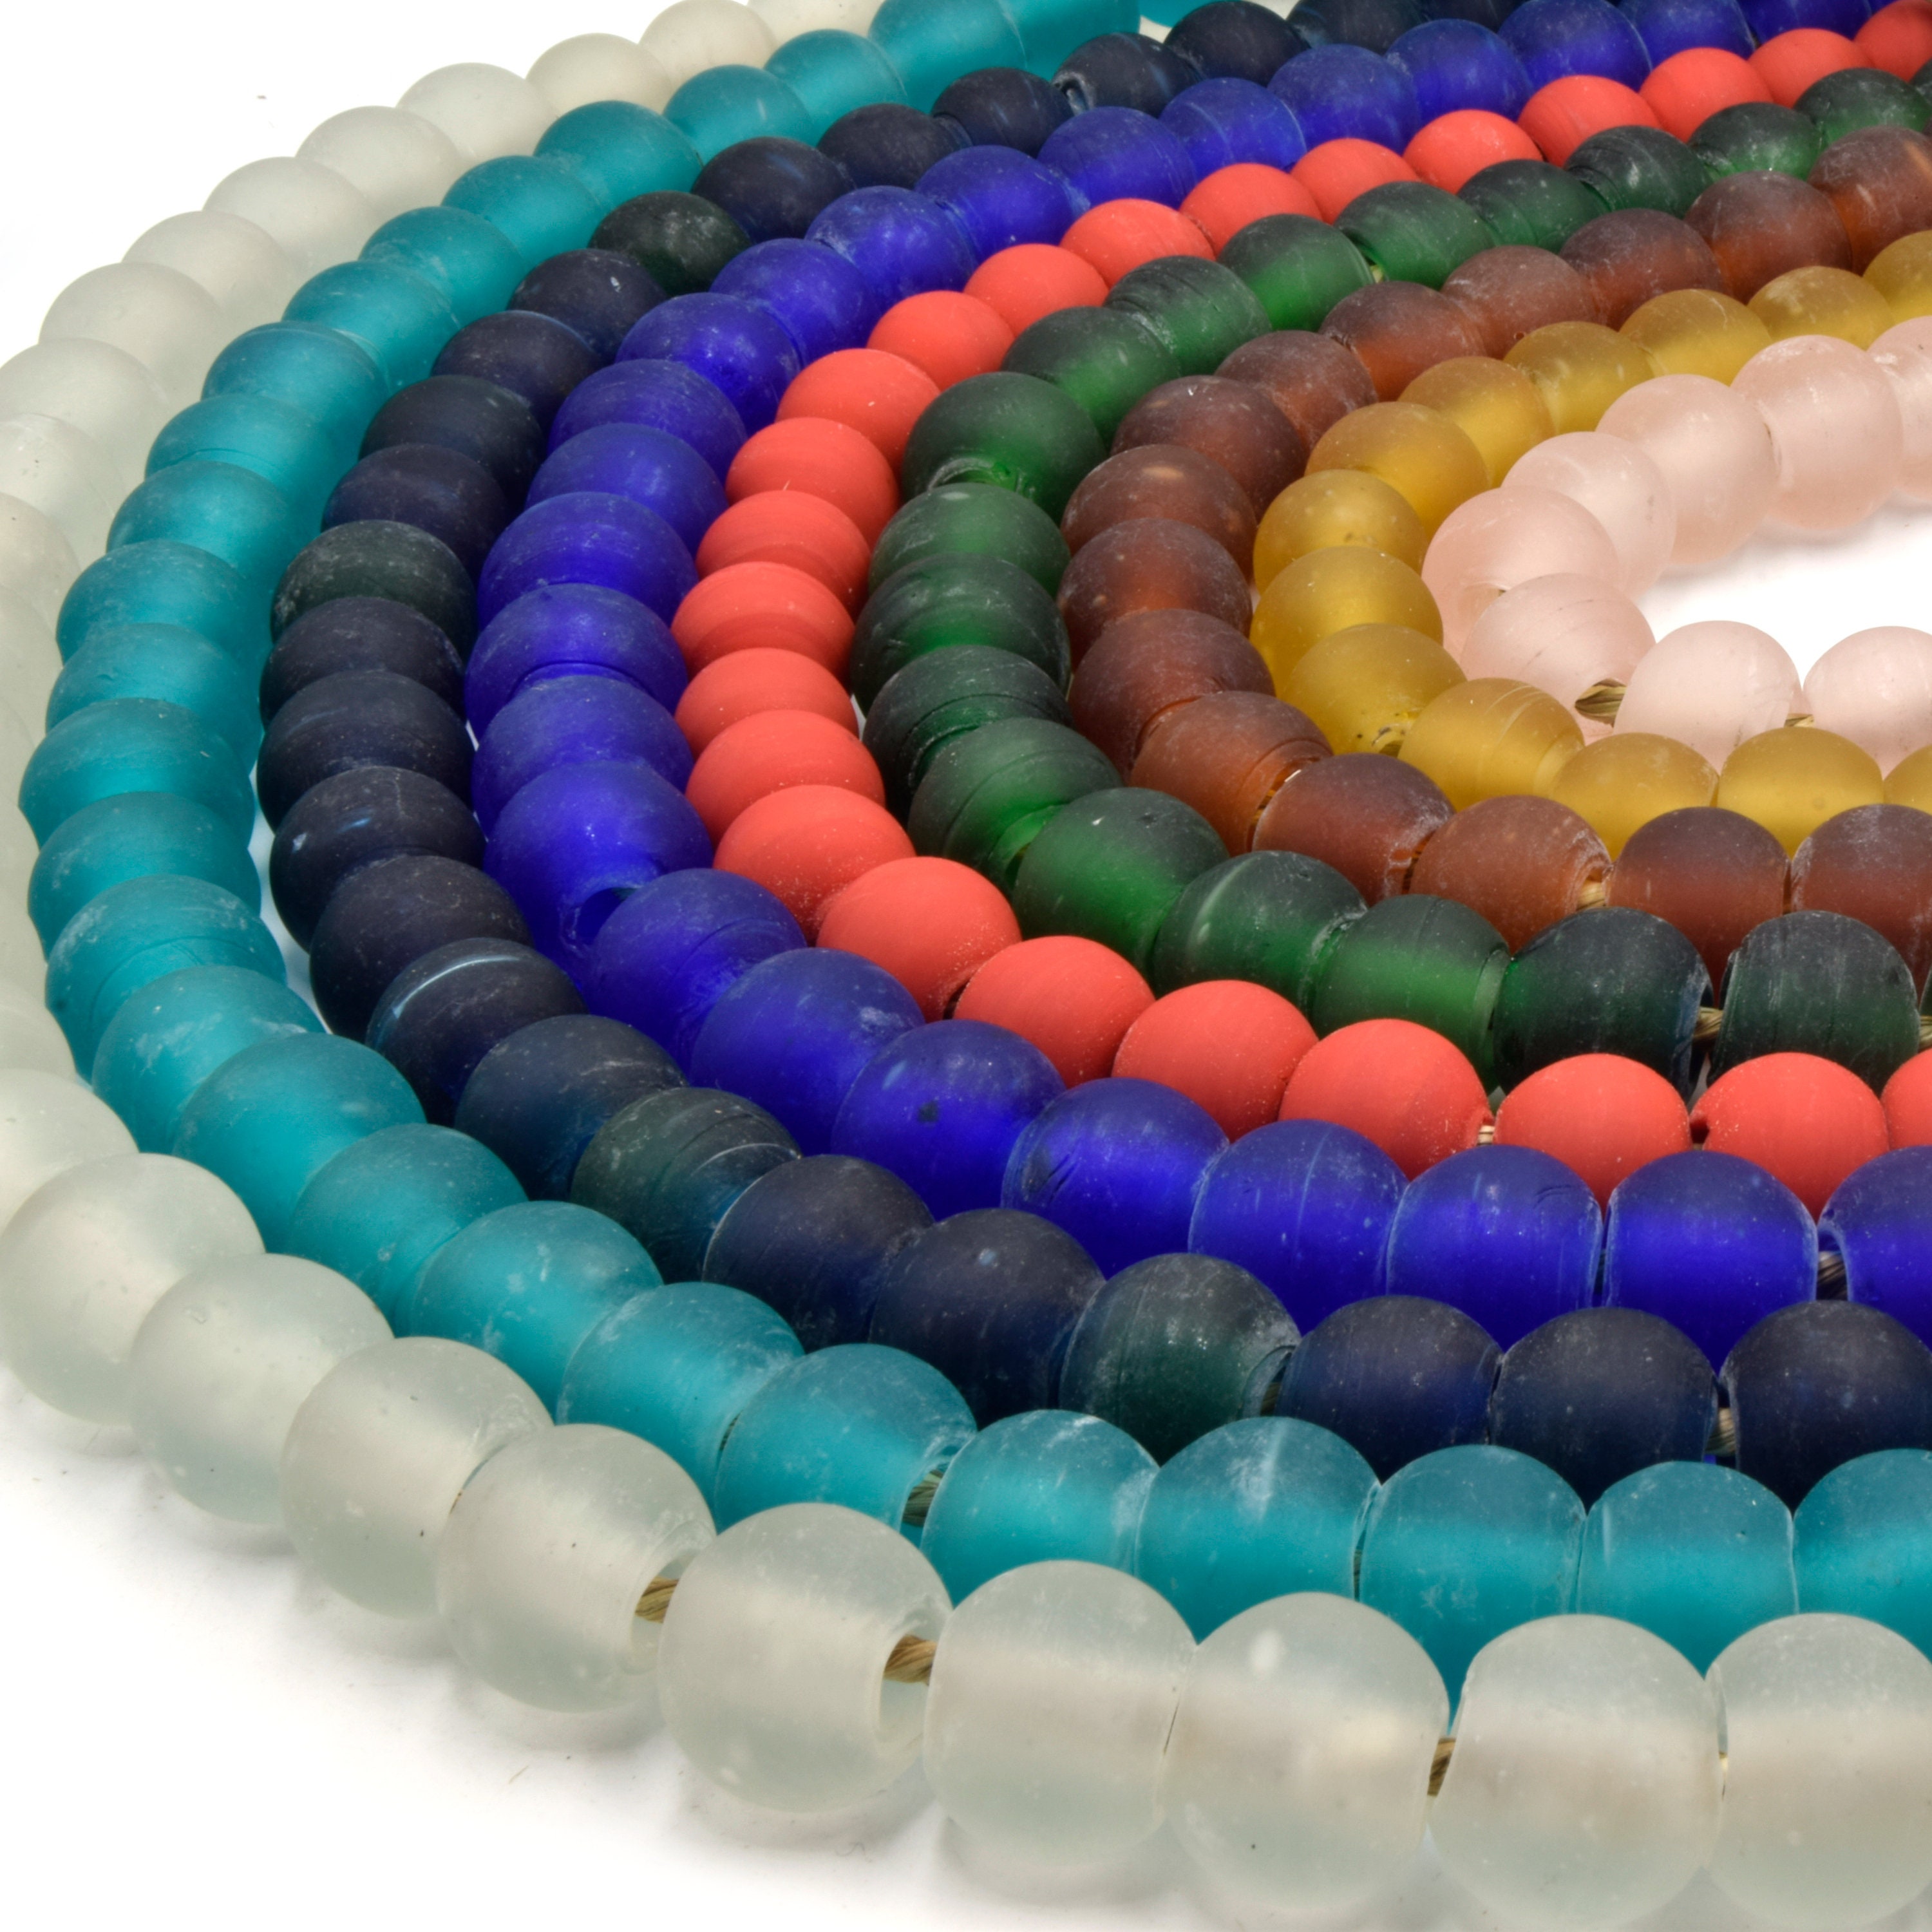 Recycled Glass Beads  14-16mm Sea Glass Round Rondelle Beads